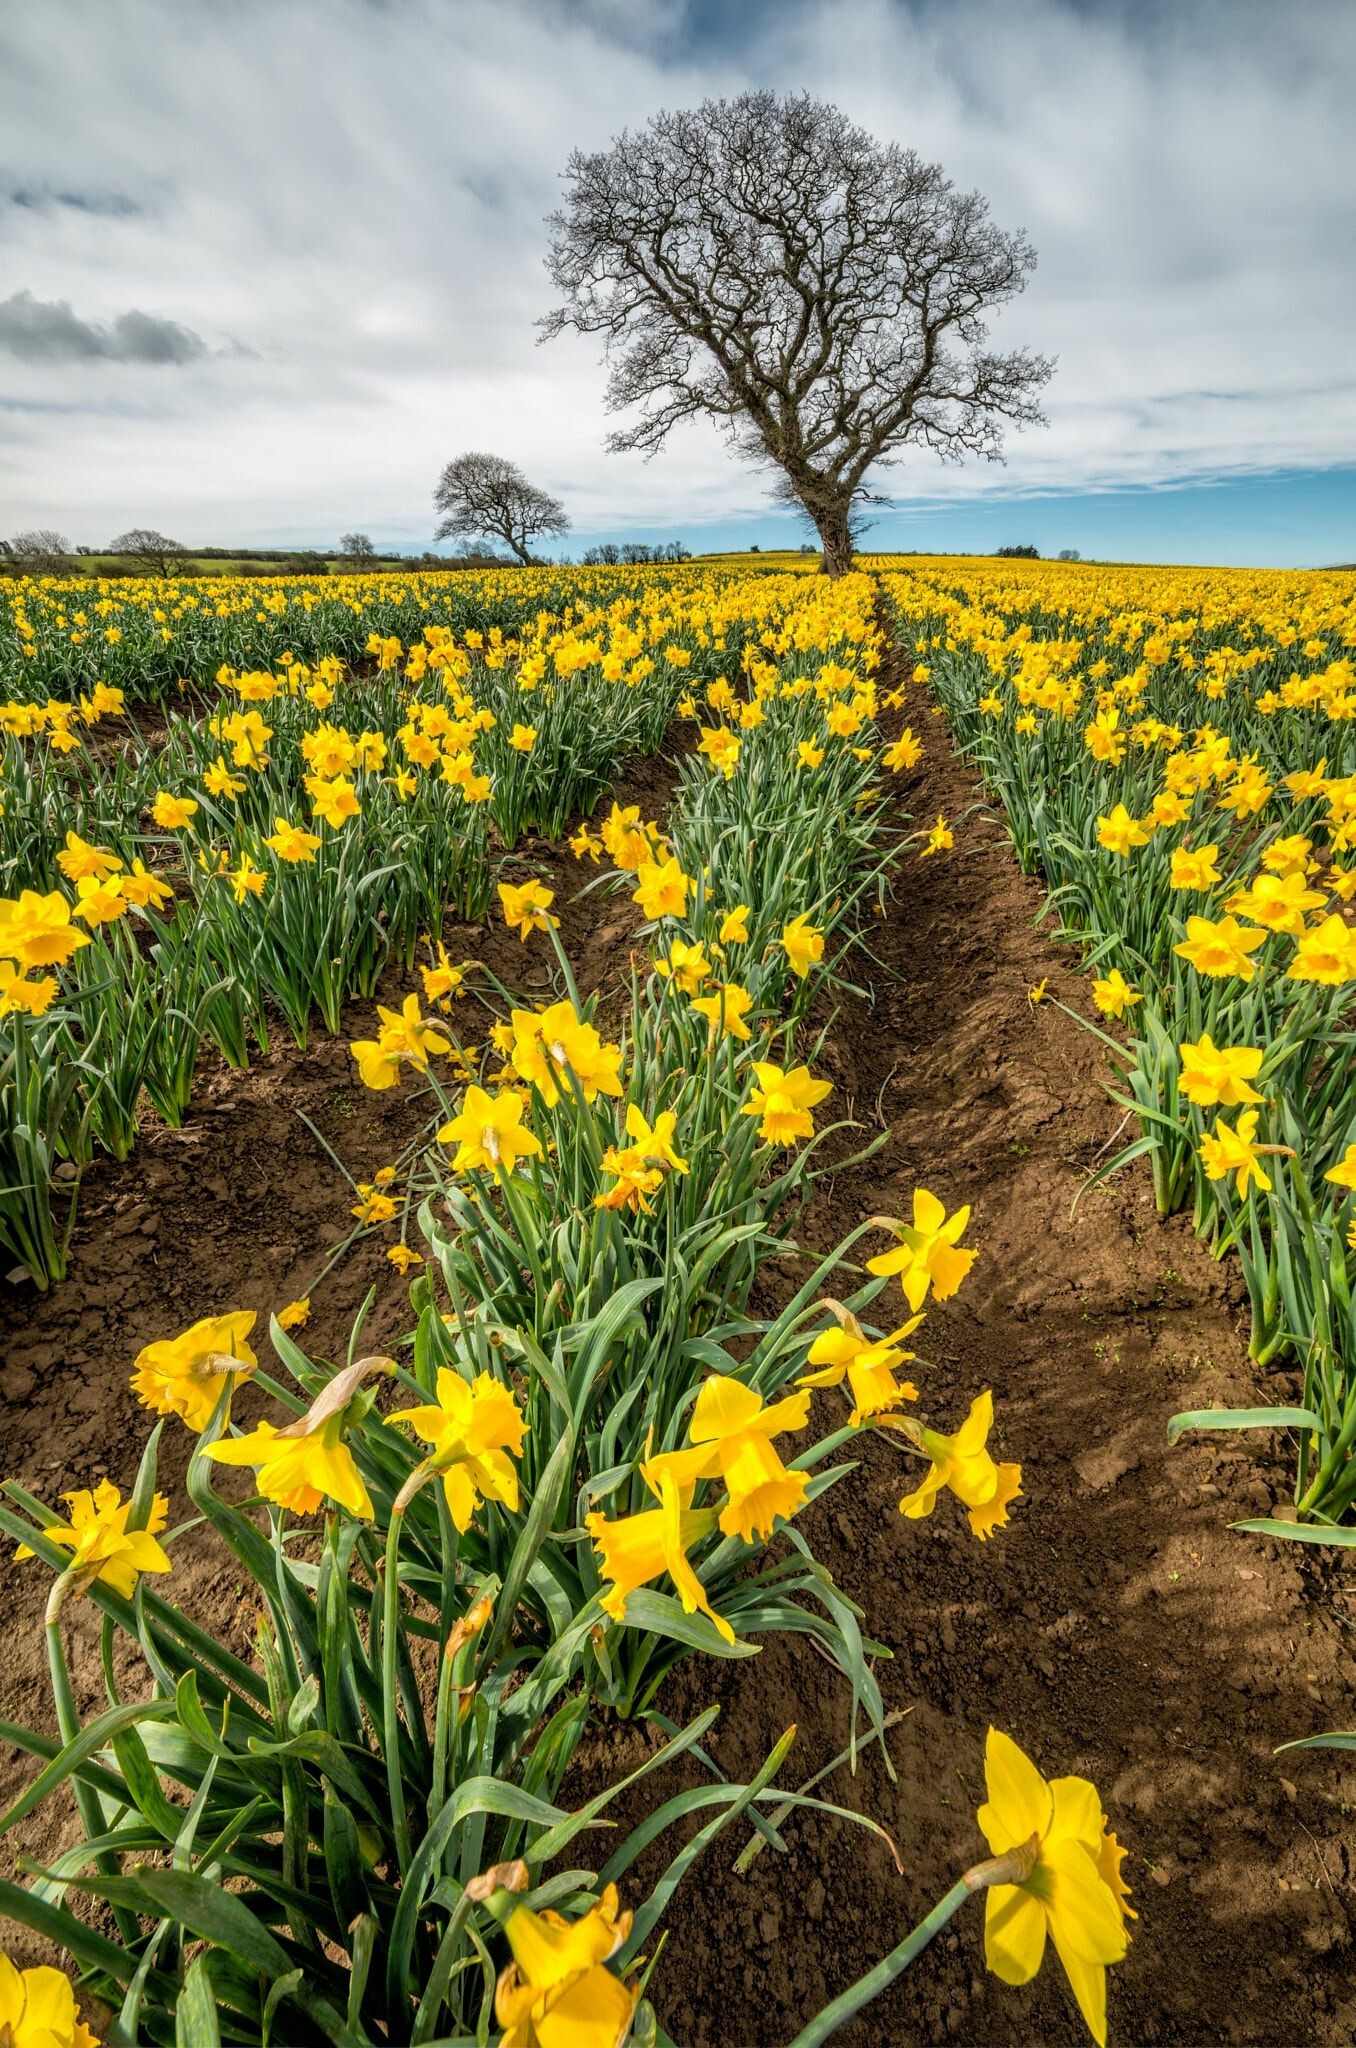 Daffodil: Trees in a field of daffodils in springtime in Wales UK, Flower field. 1360x2050 HD Background.